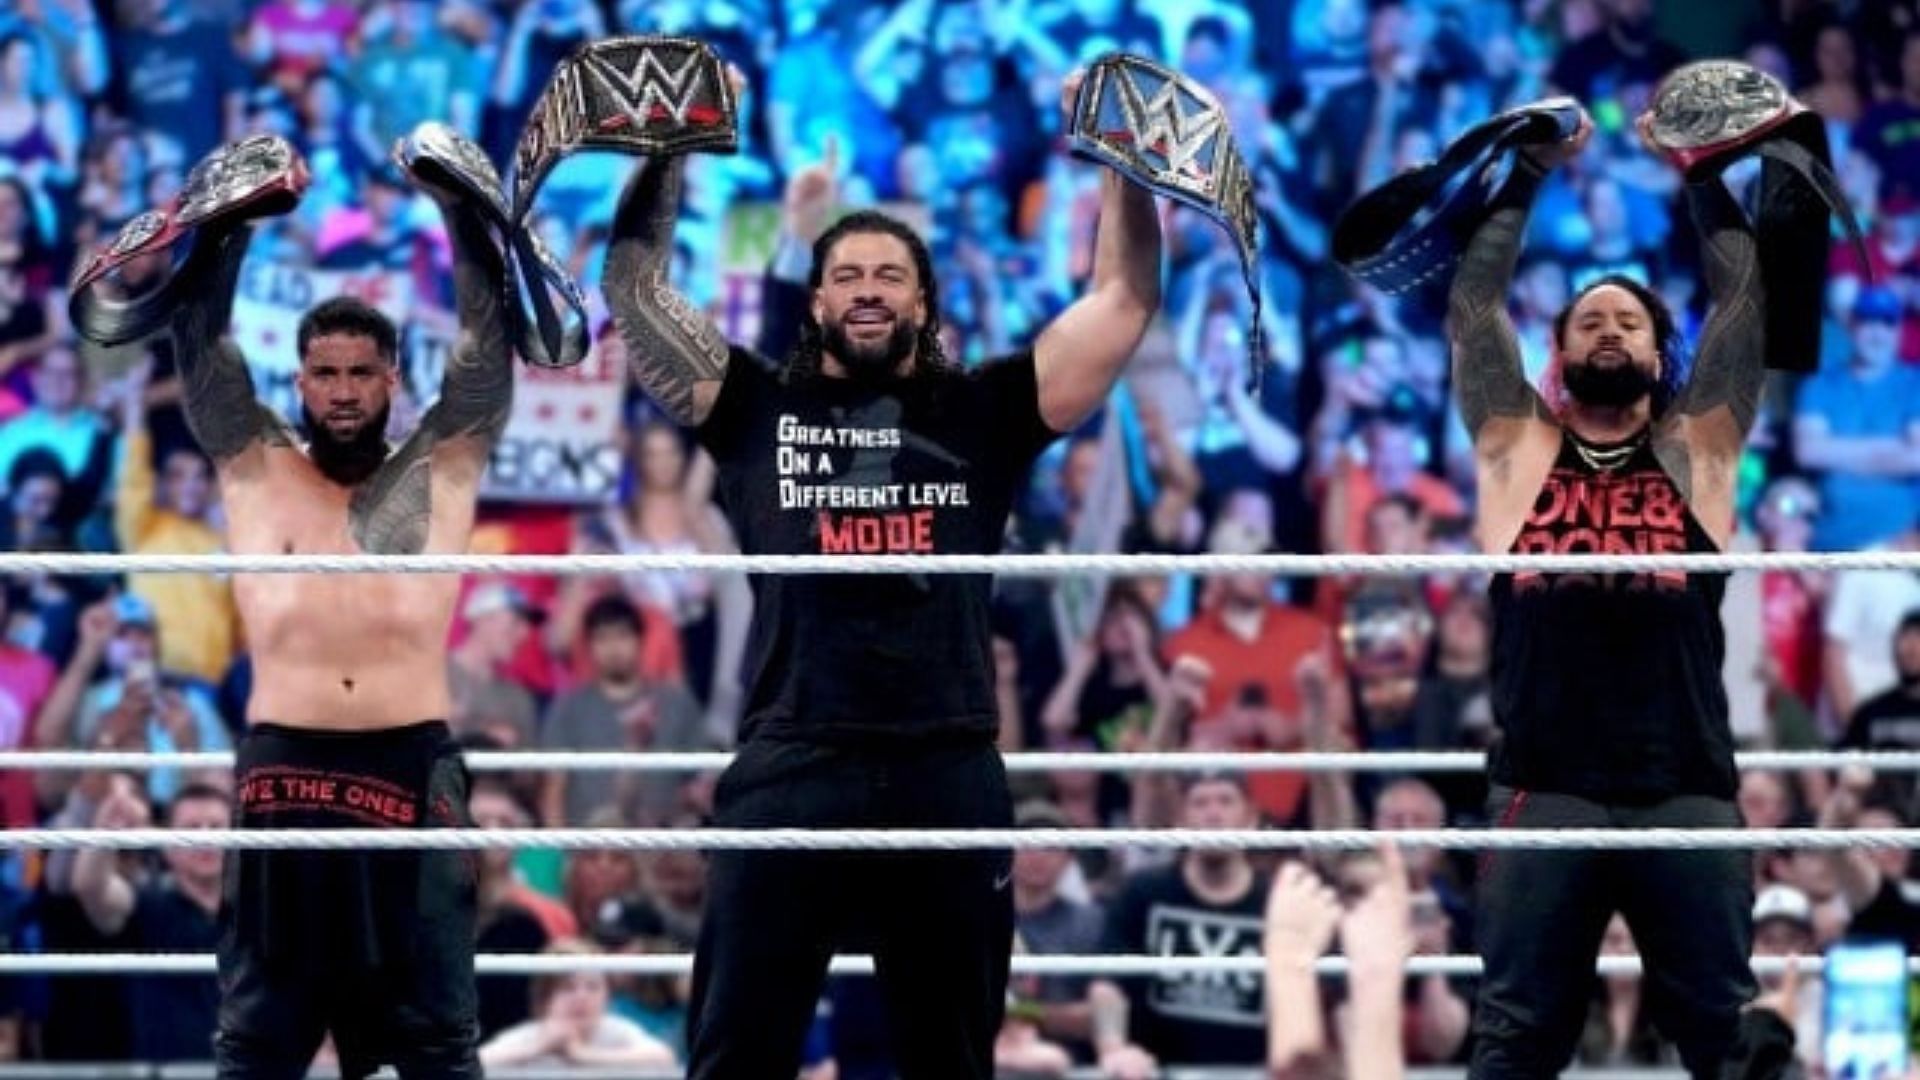 Will Roman Reigns and The Usos turn babyfaces down the line?